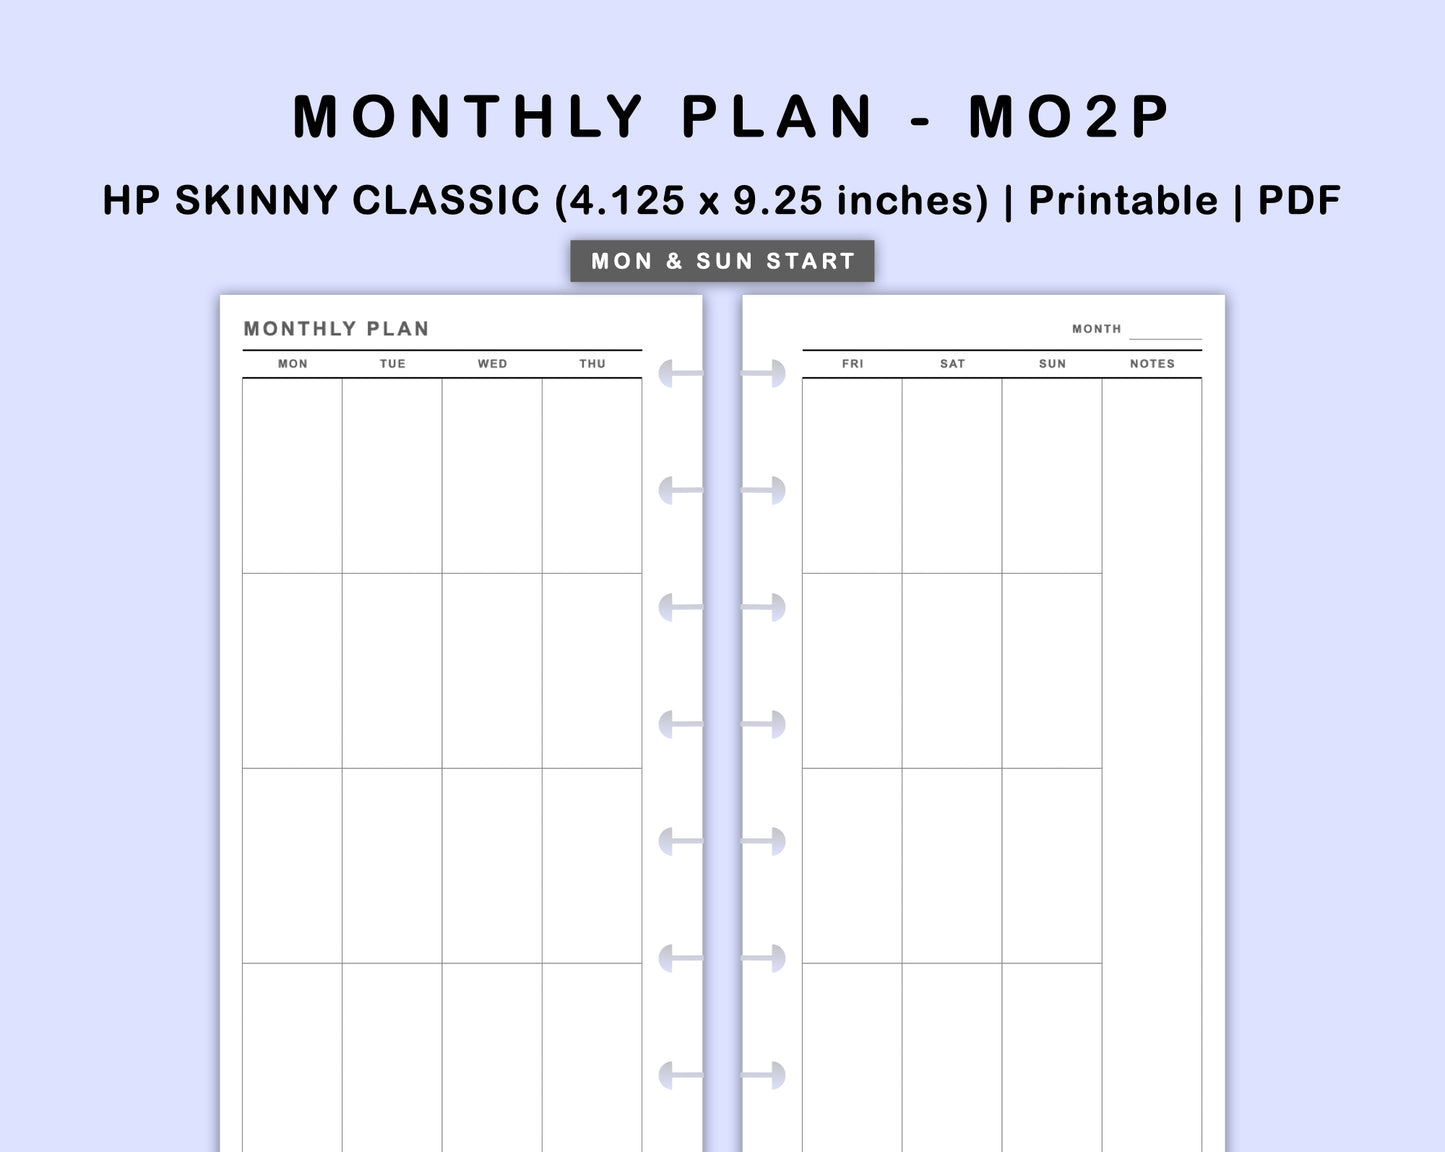 Skinny Classic HP Inserts - Monthly Plan - MO2P